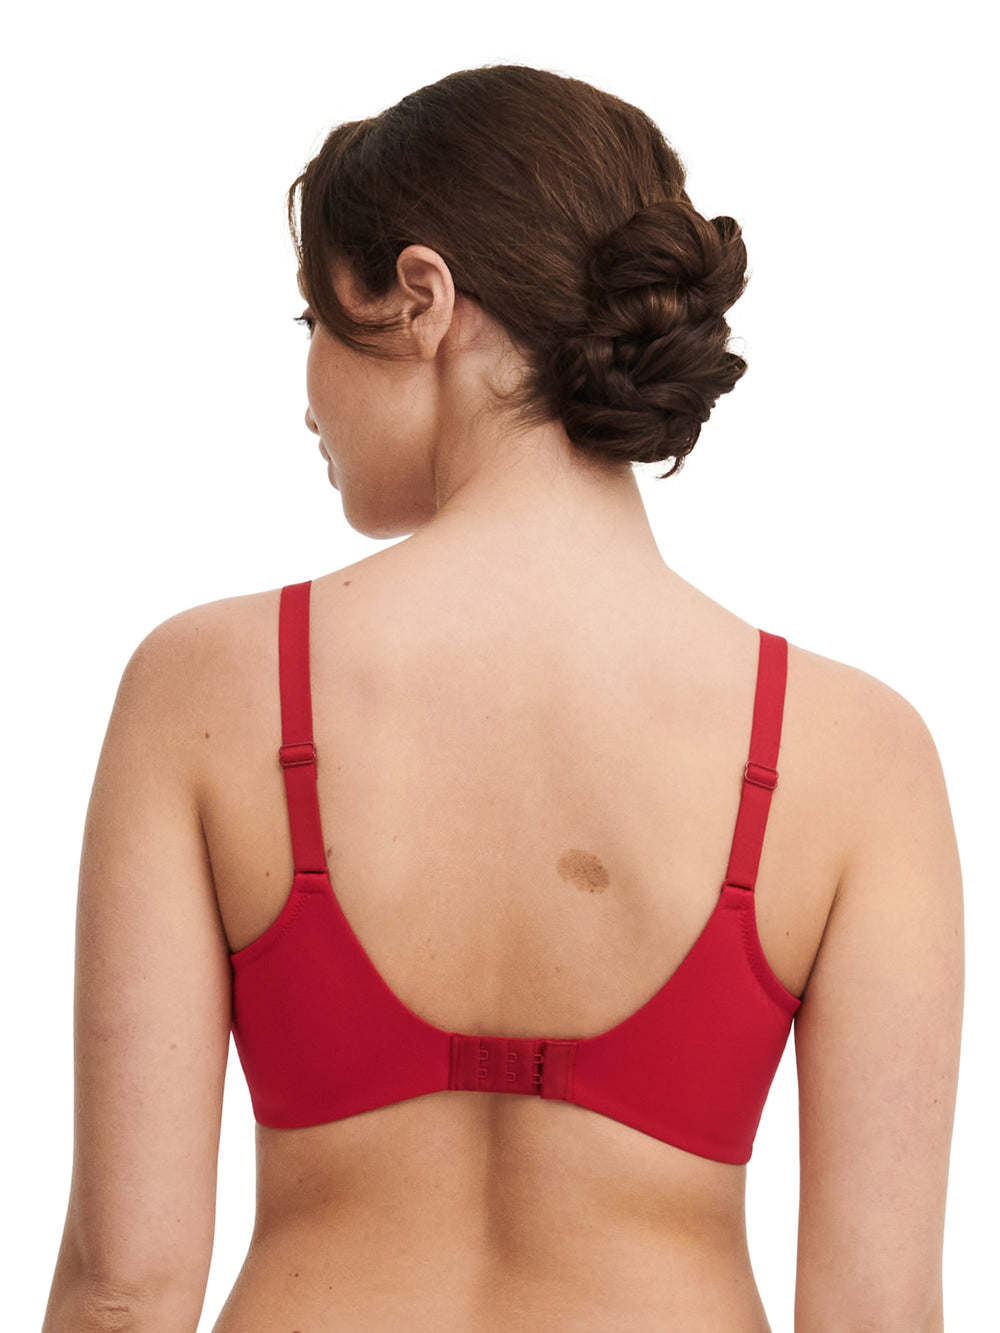 Chantelle Easyfeel - Floral Touch Full Cup Bra Scarlet Full Cup Bra Chantelle EasyFeel 